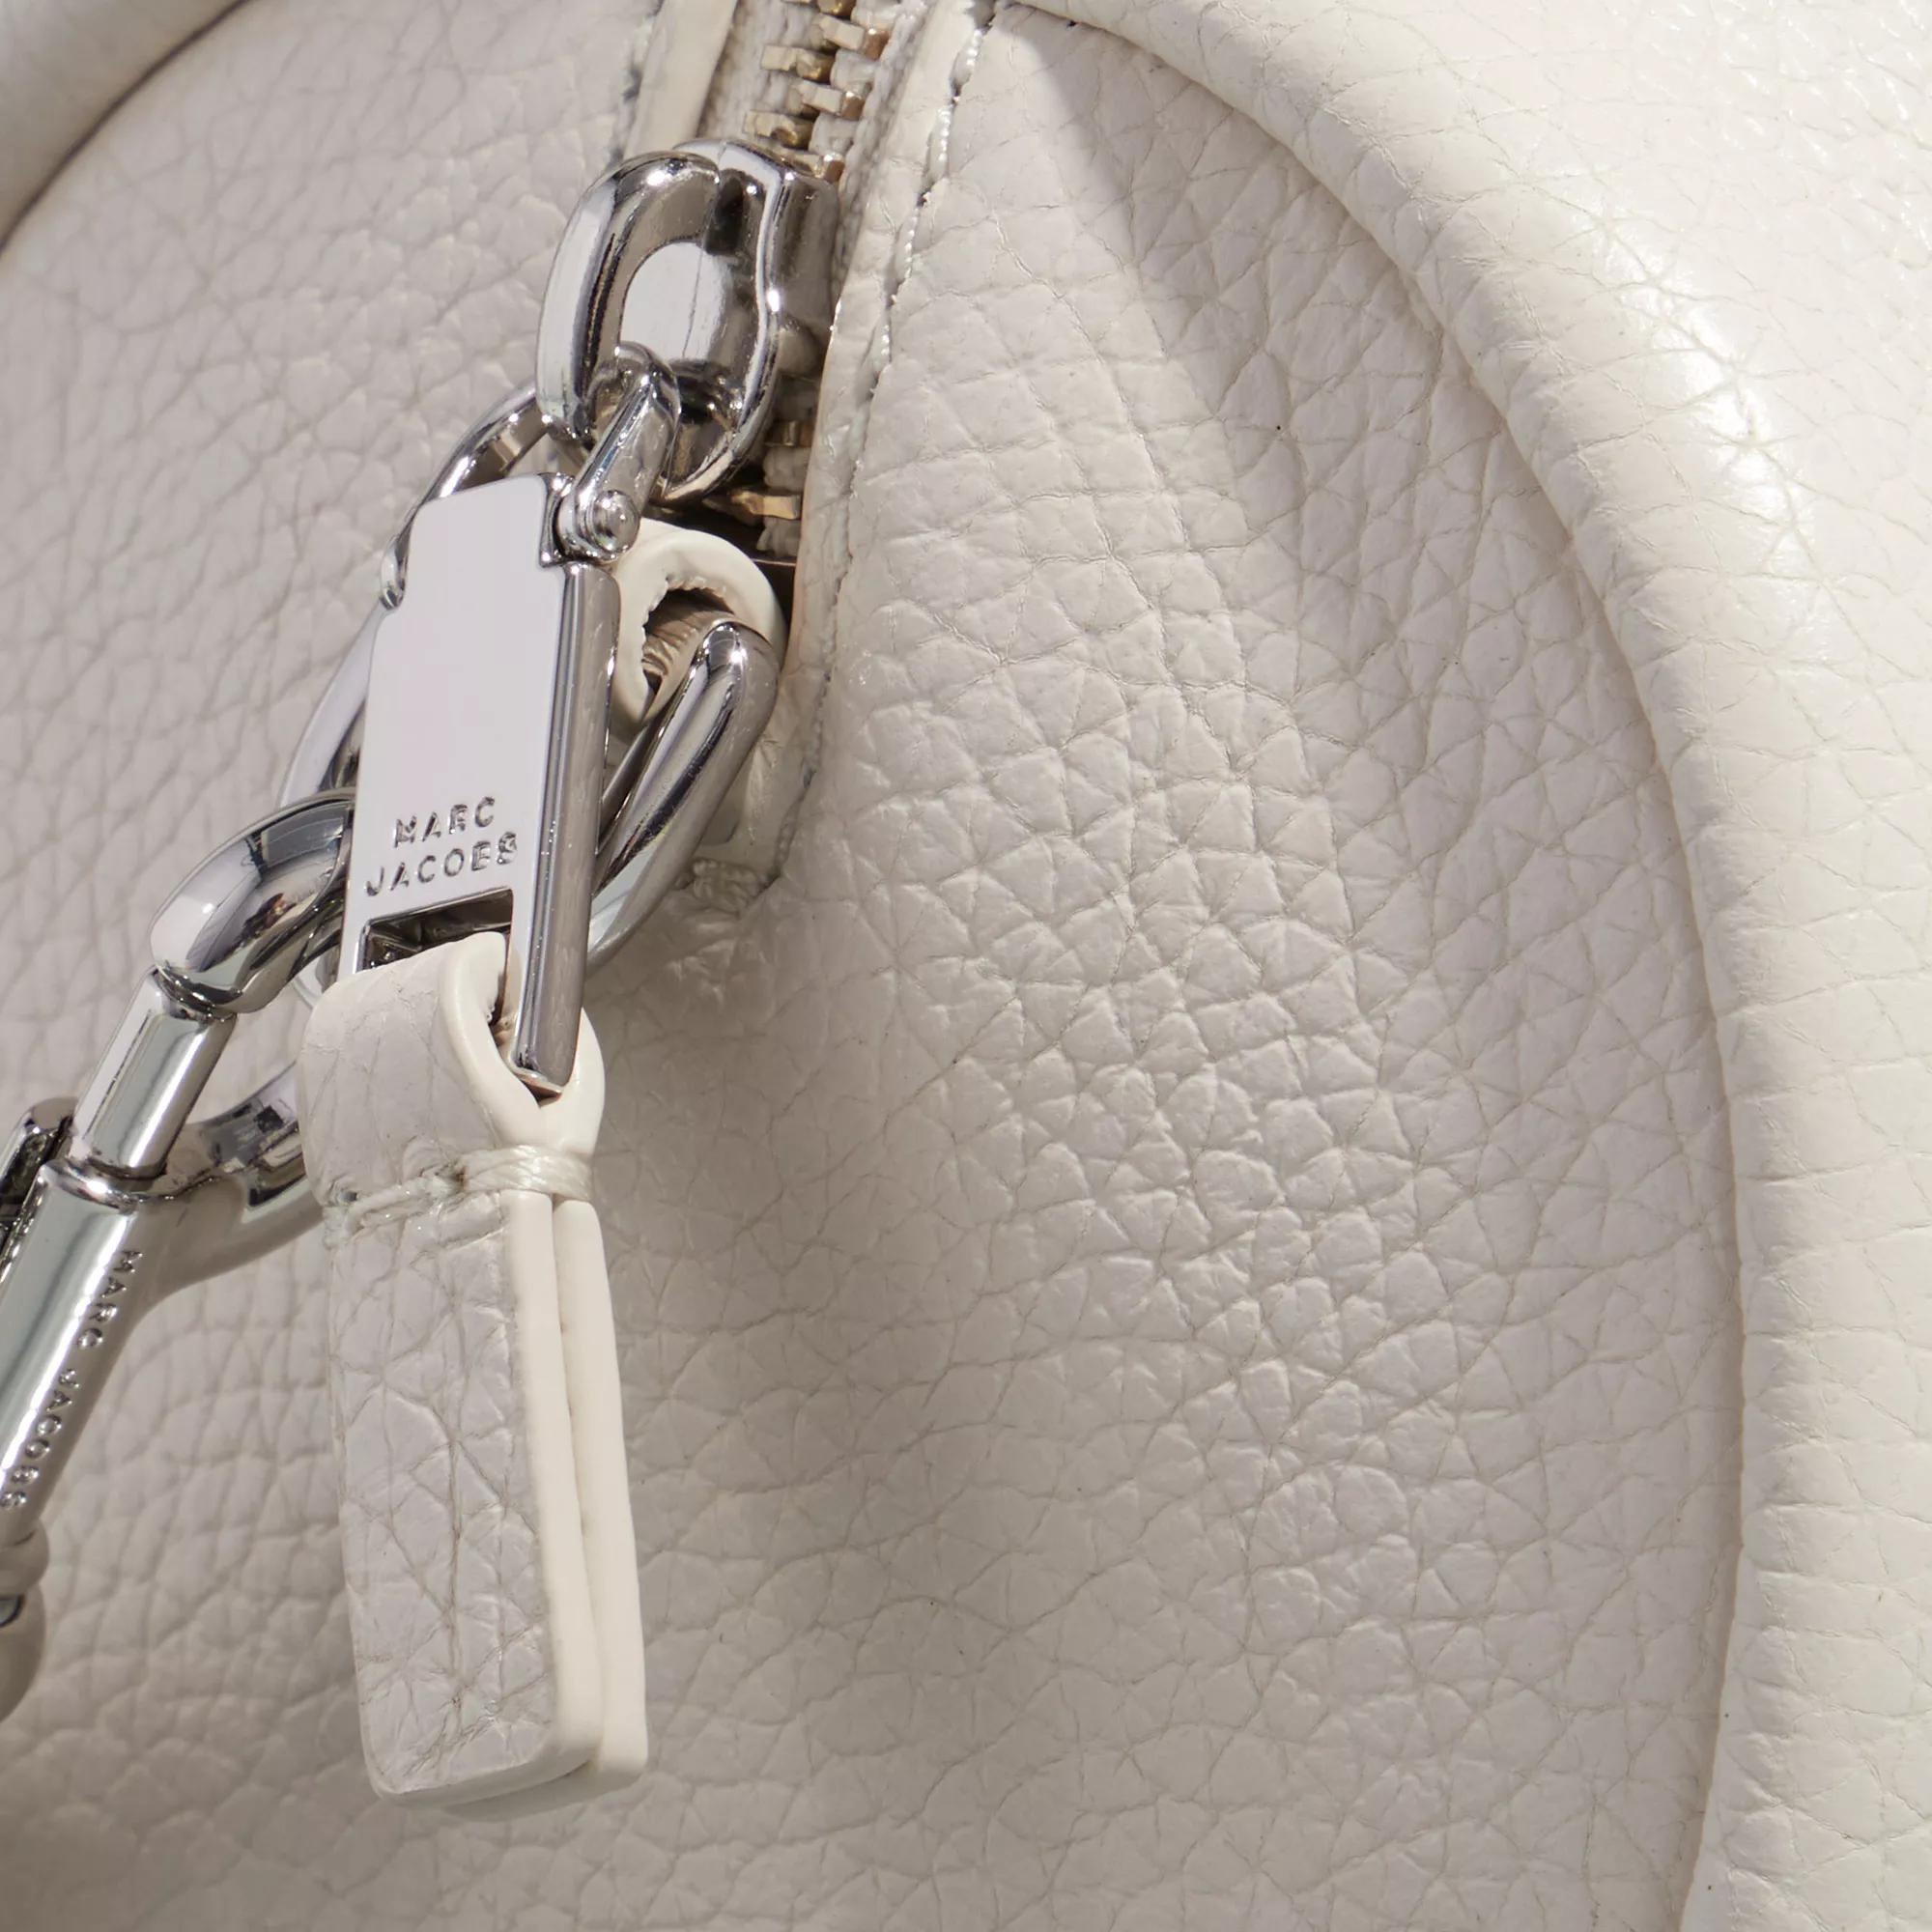 Marc Jacobs Crossbody bags The Mini Duffle in crème